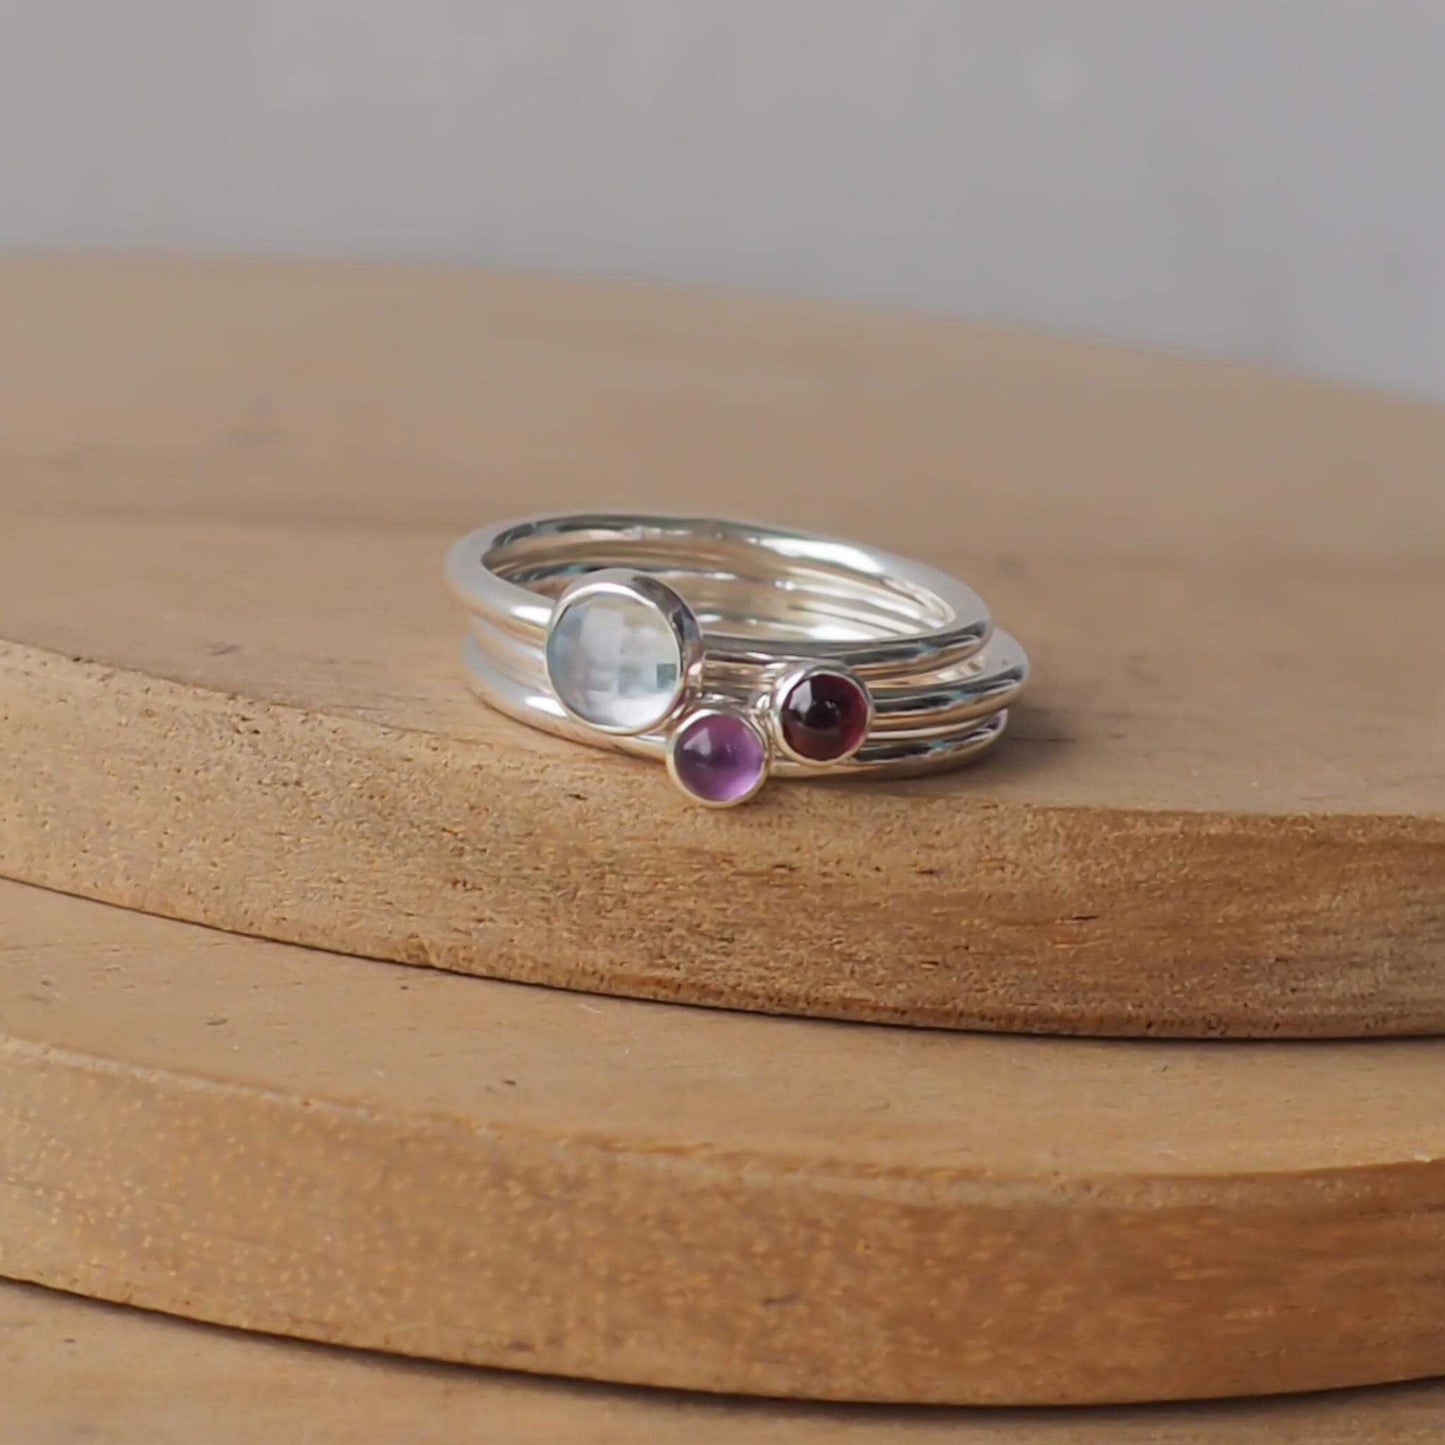 Three Birthstone Ring set with Blue Topaz, Garnet and Citrine to mark March, January and February Birthdays. The three rings are made with Sterling Silver and a 5mm blue round cabochon, with two further rings with 3mm round gems in a deep red garnet and purple Amethyst. Handmade in Scotland by maram jewellery